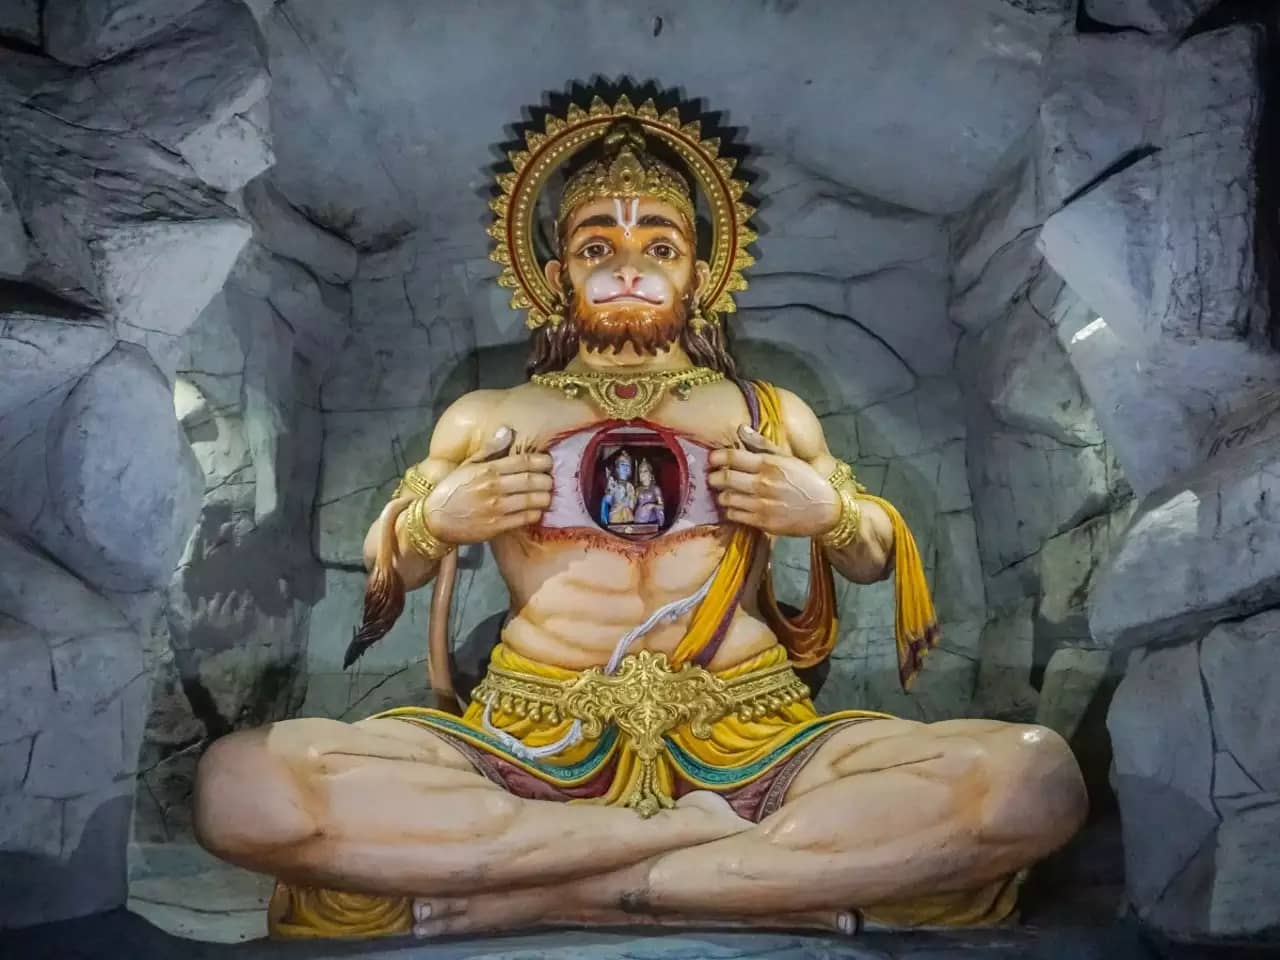 Popular Quotes on Hanuman Jayanthi - Inspiring Words of Devotion and Reverence